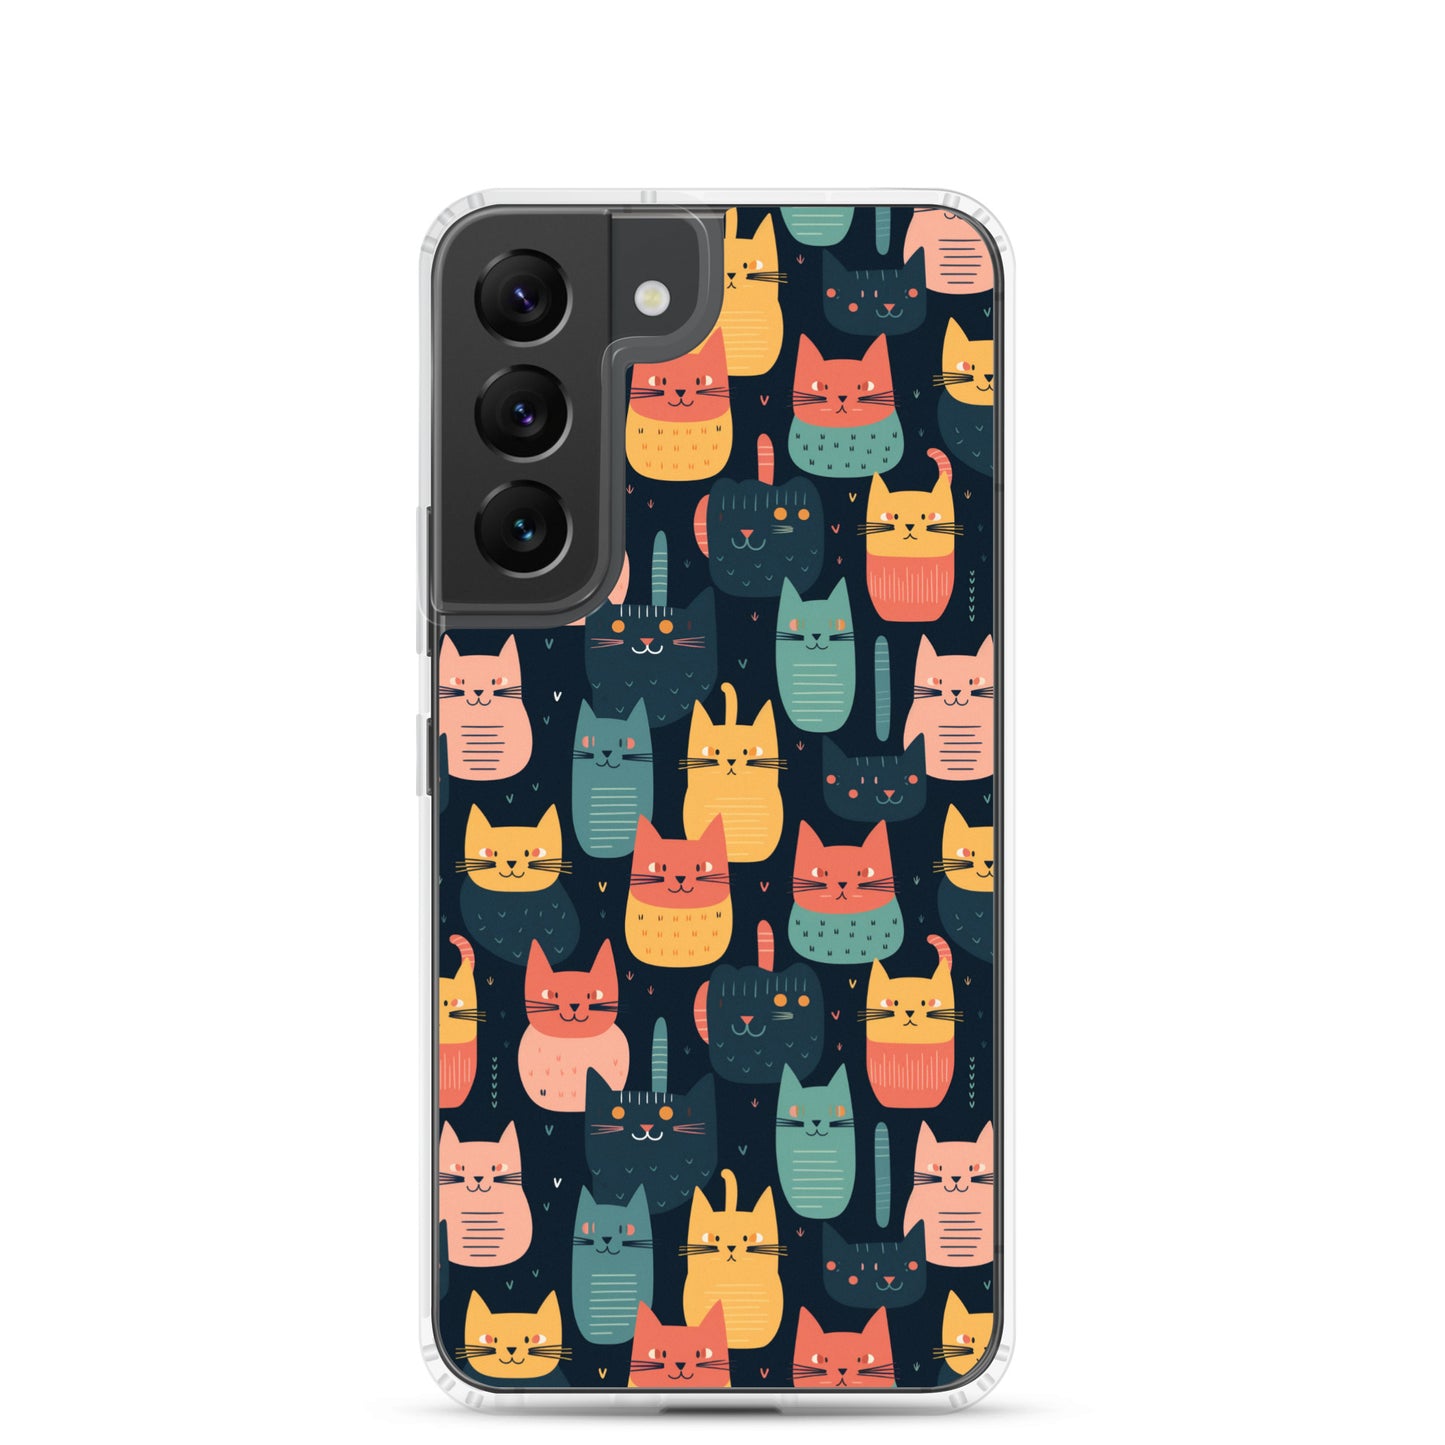 Samsung Case - Abstract Cats